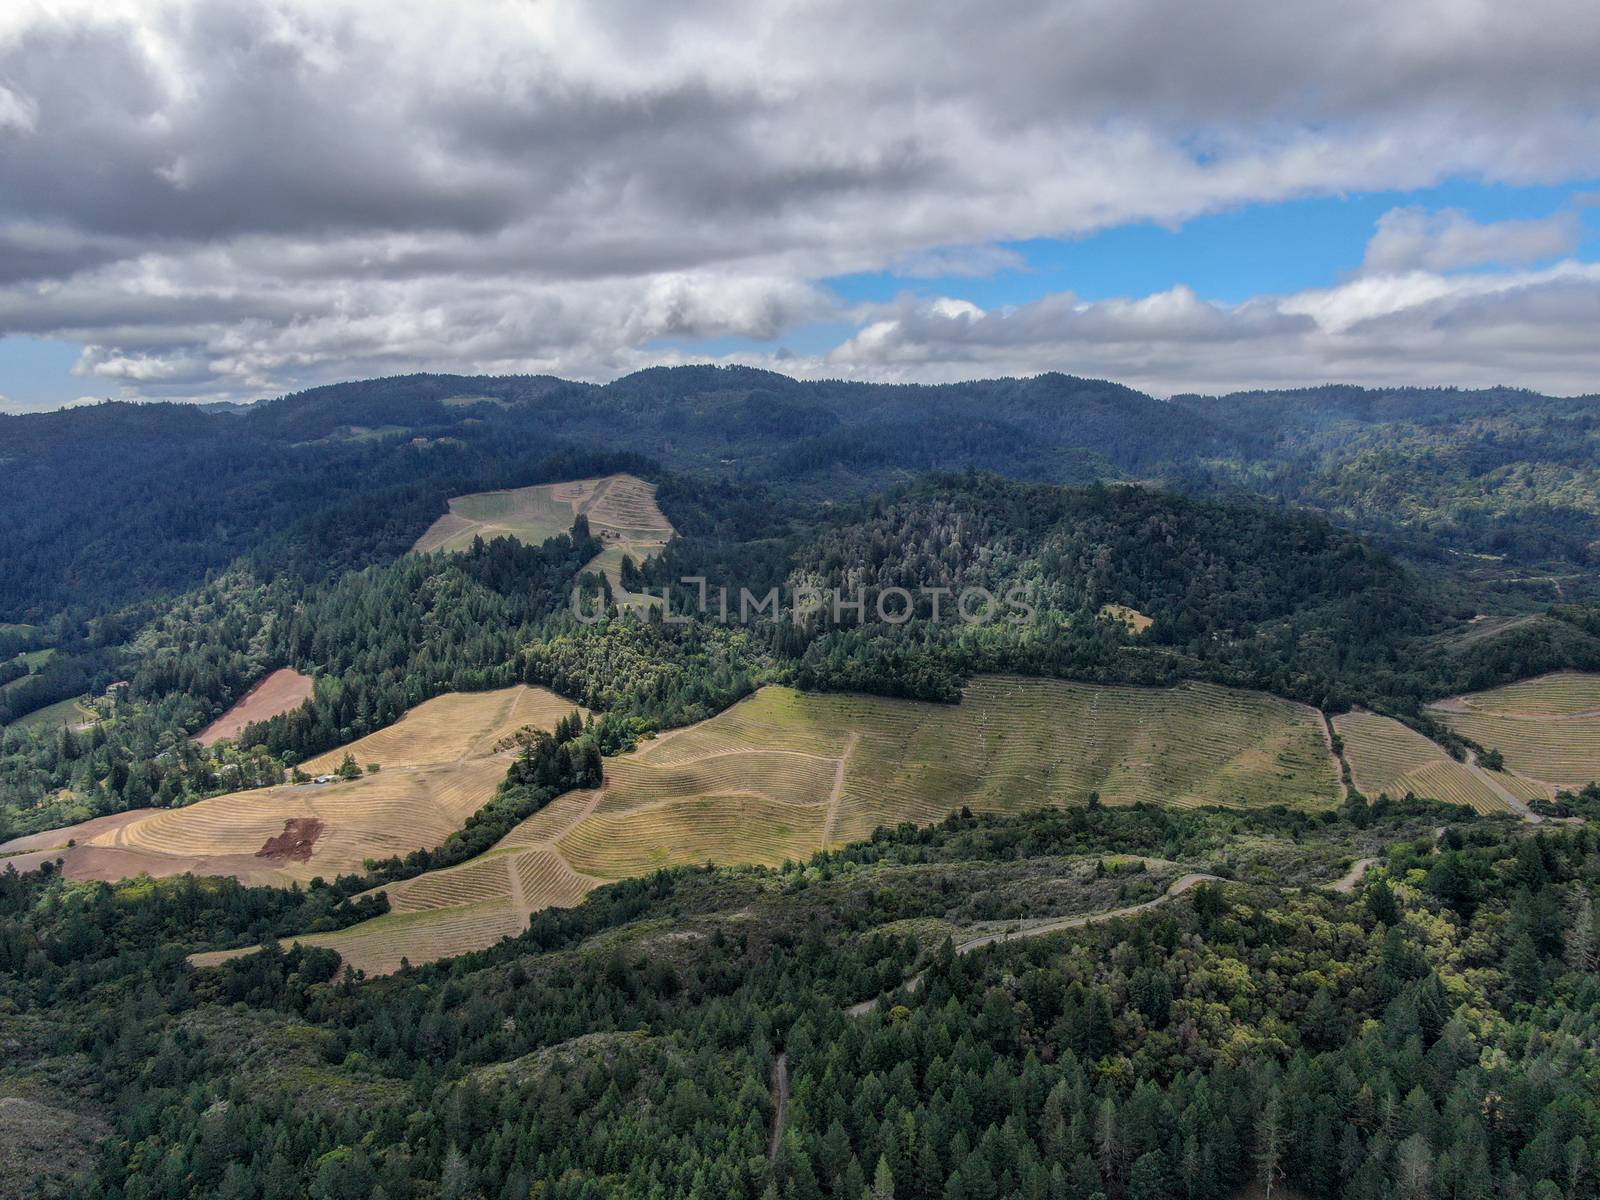 Aerial view of Napa Valley vineyard landscape during summer season. Napa County, in California's Wine Country.